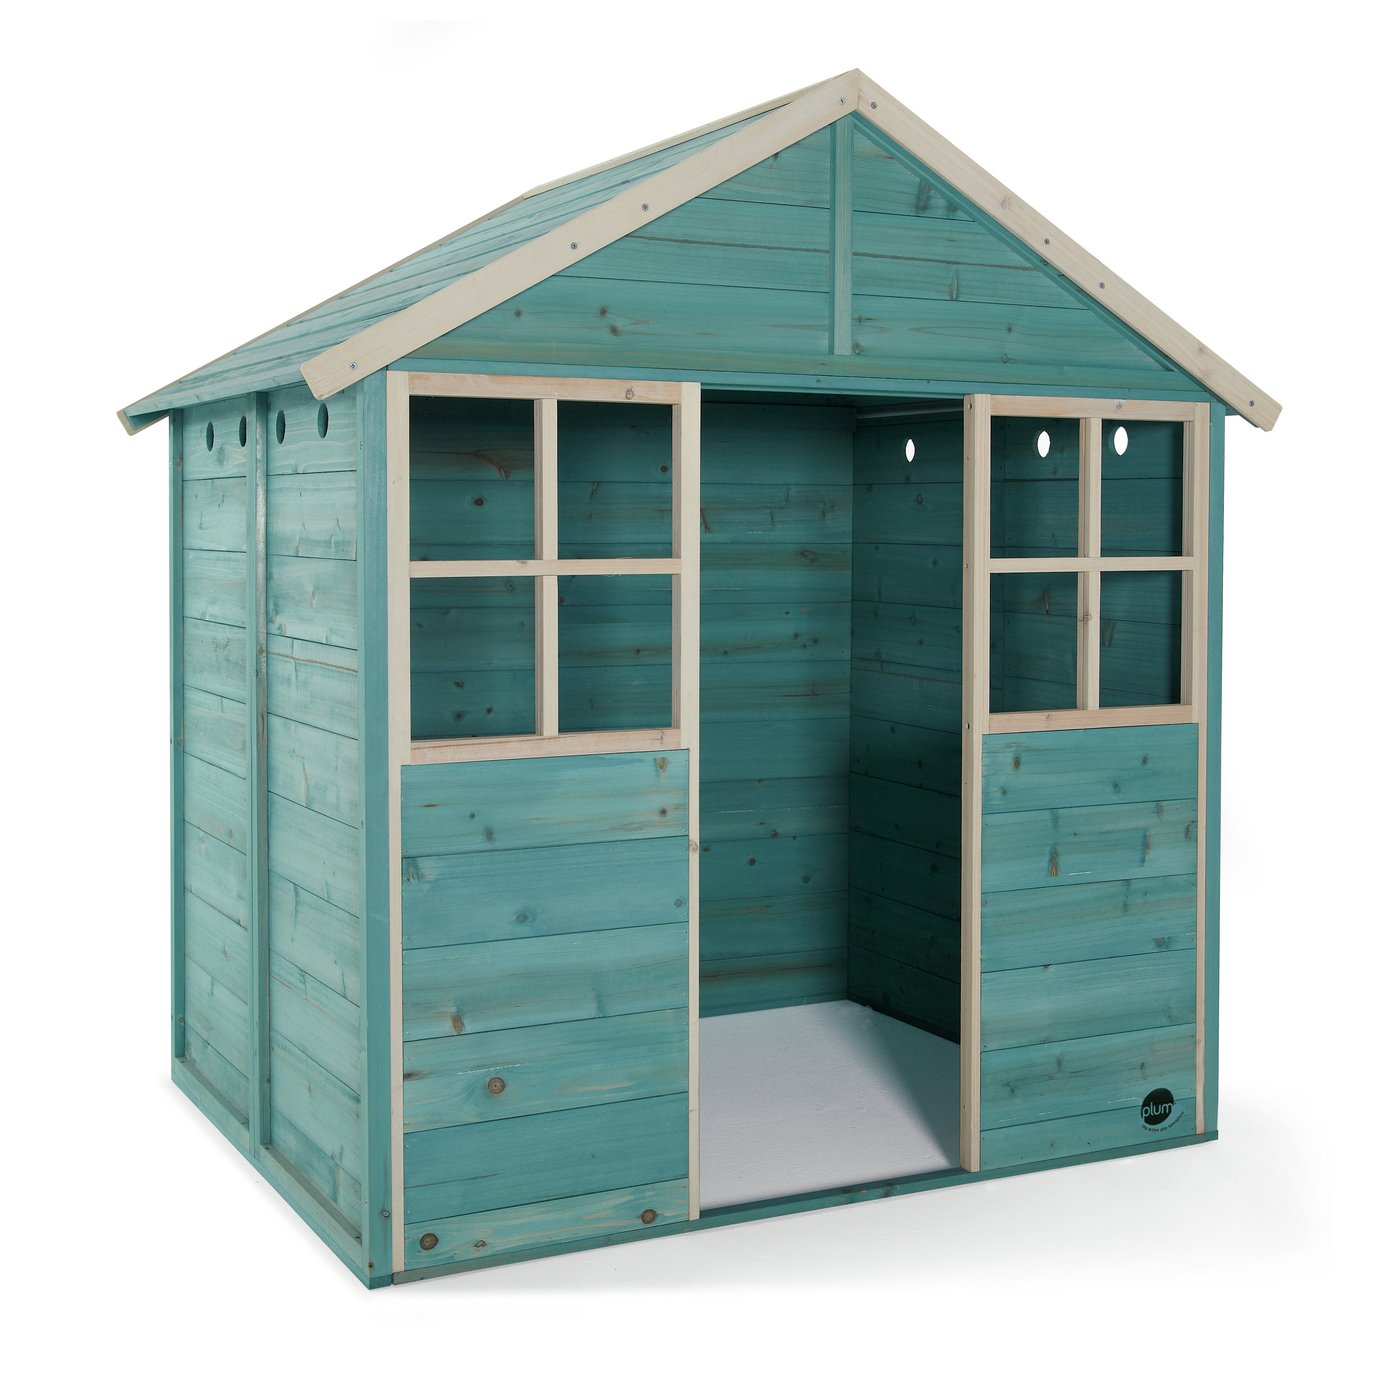 tp wooden meadow cottage playhouse